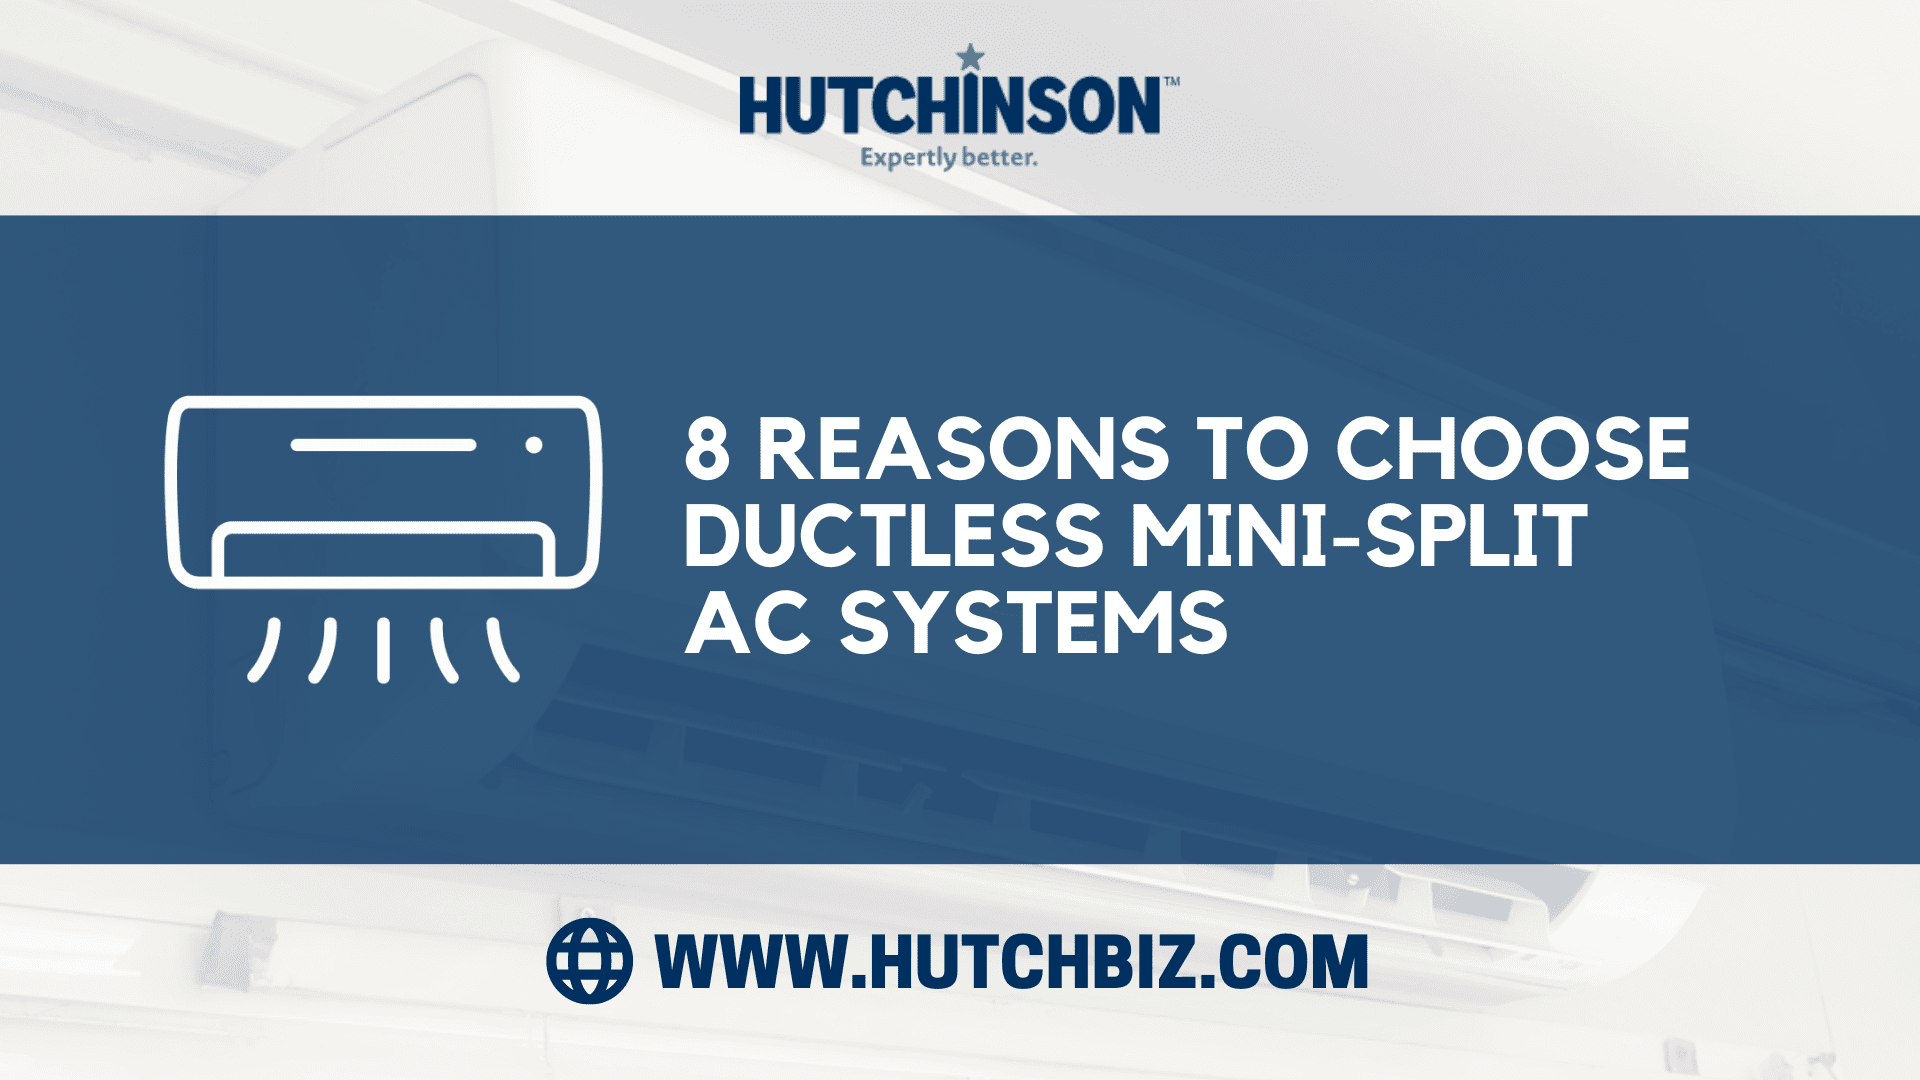 8 Reasons To Choose Ductless Mini-split AC Systems